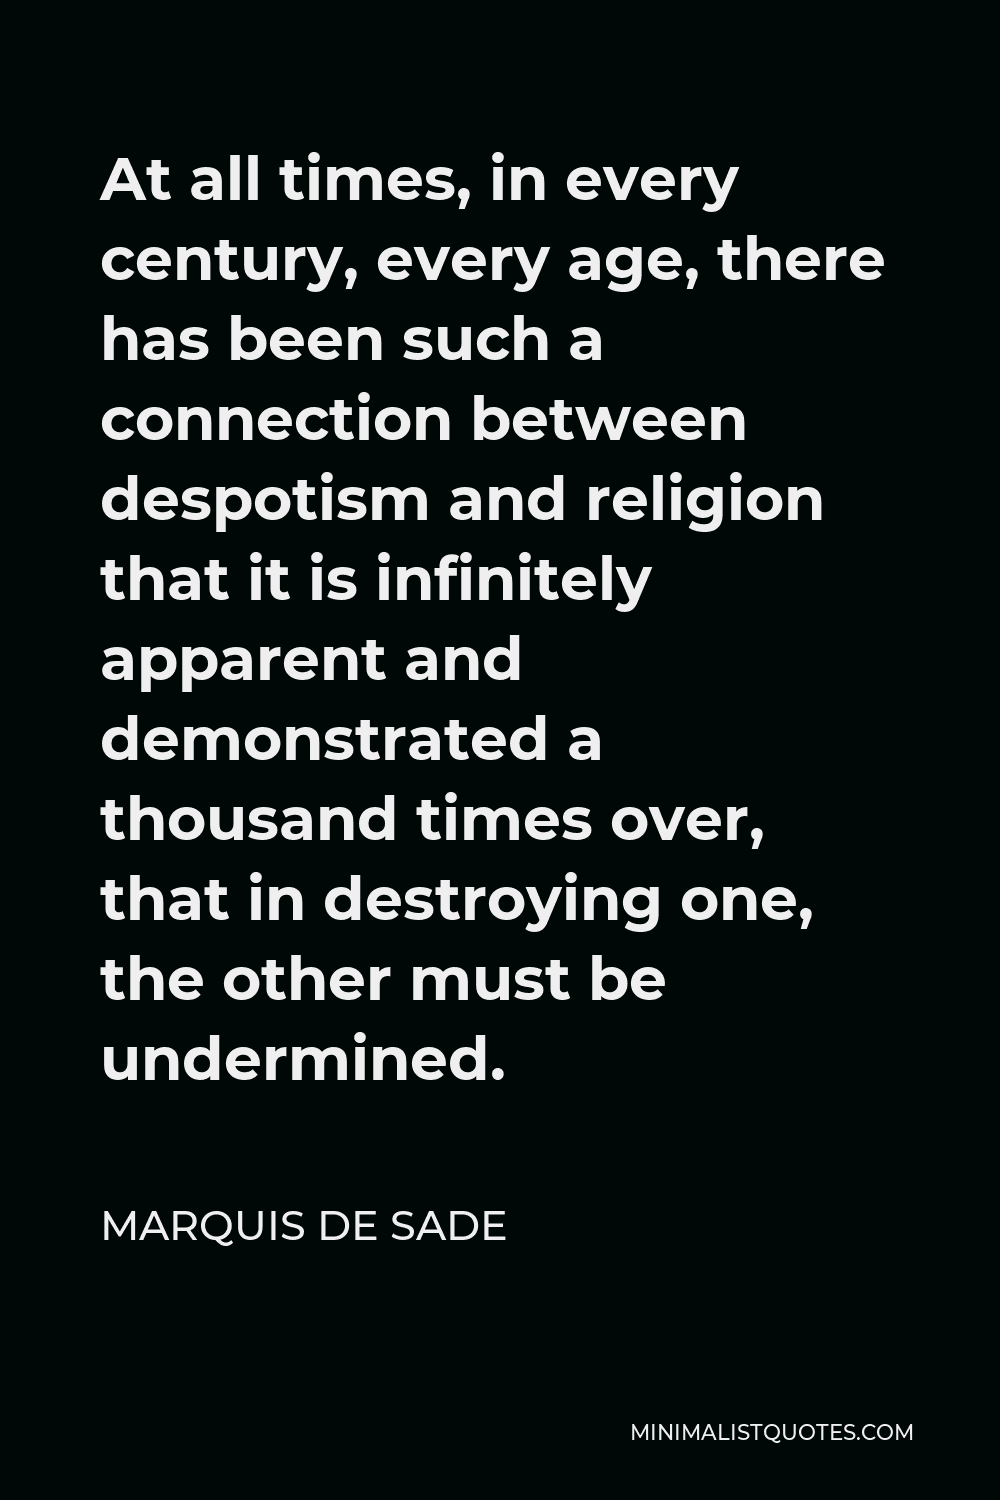 Marquis de Sade Quote - At all times, in every century, every age, there has been such a connection between despotism and religion that it is infinitely apparent and demonstrated a thousand times over, that in destroying one, the other must be undermined.